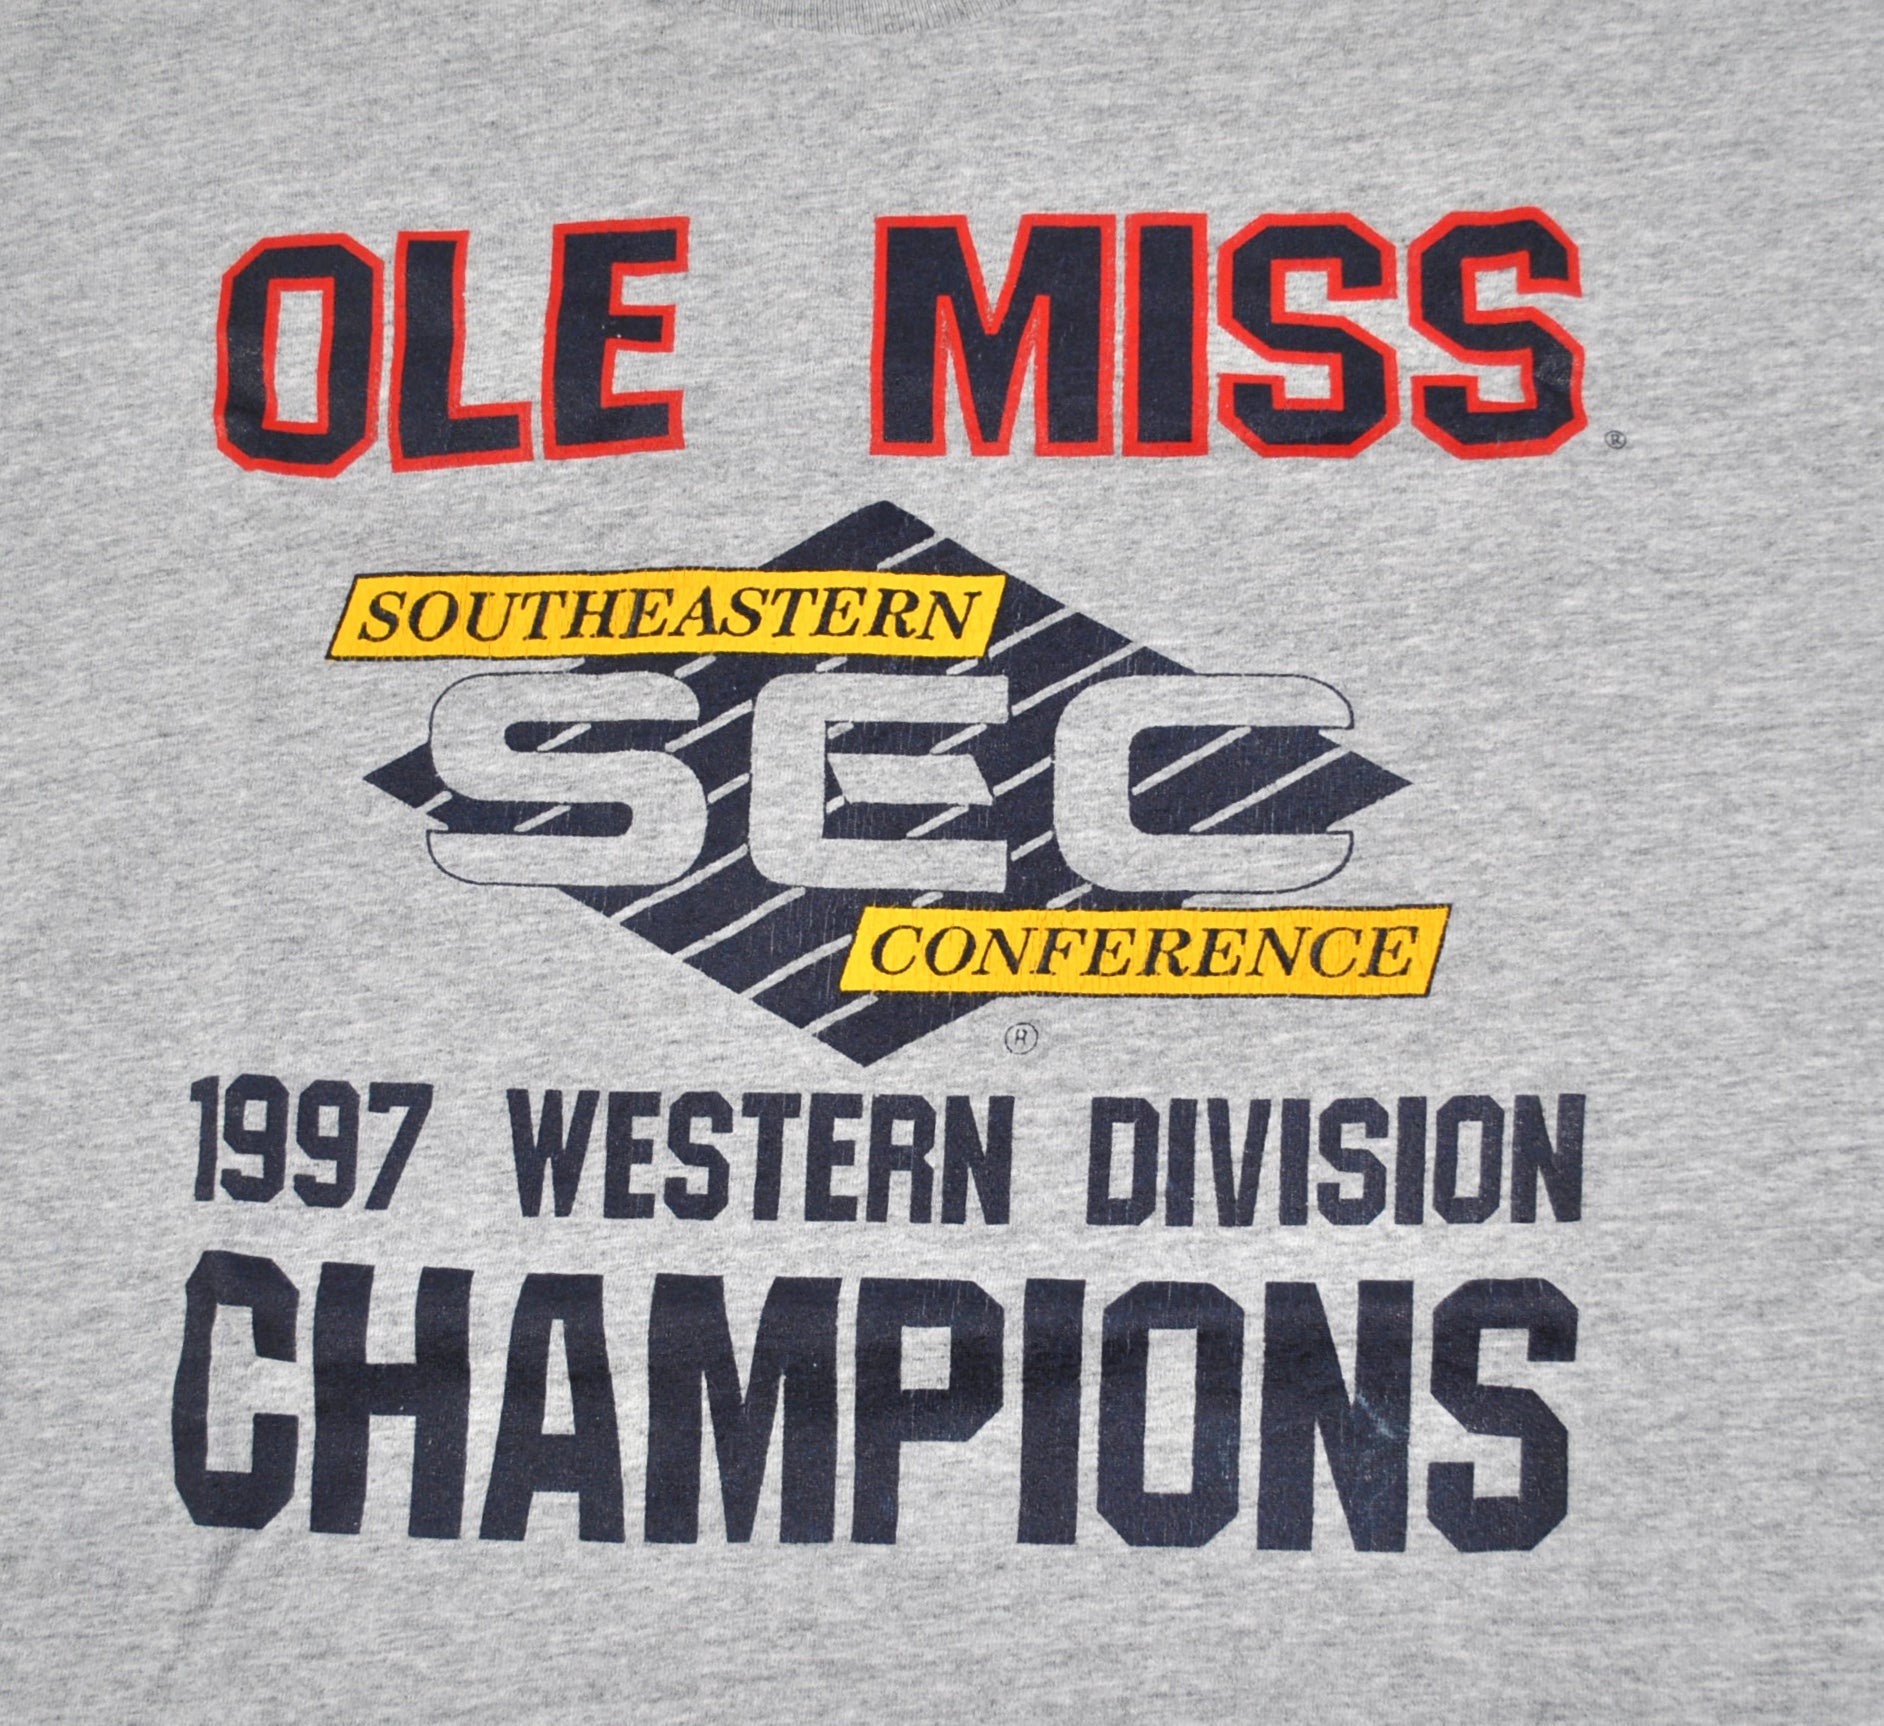 Vintage Ole Miss Rebels 1997 SEC Western Division Champions Shirt Size –  Yesterday's Attic